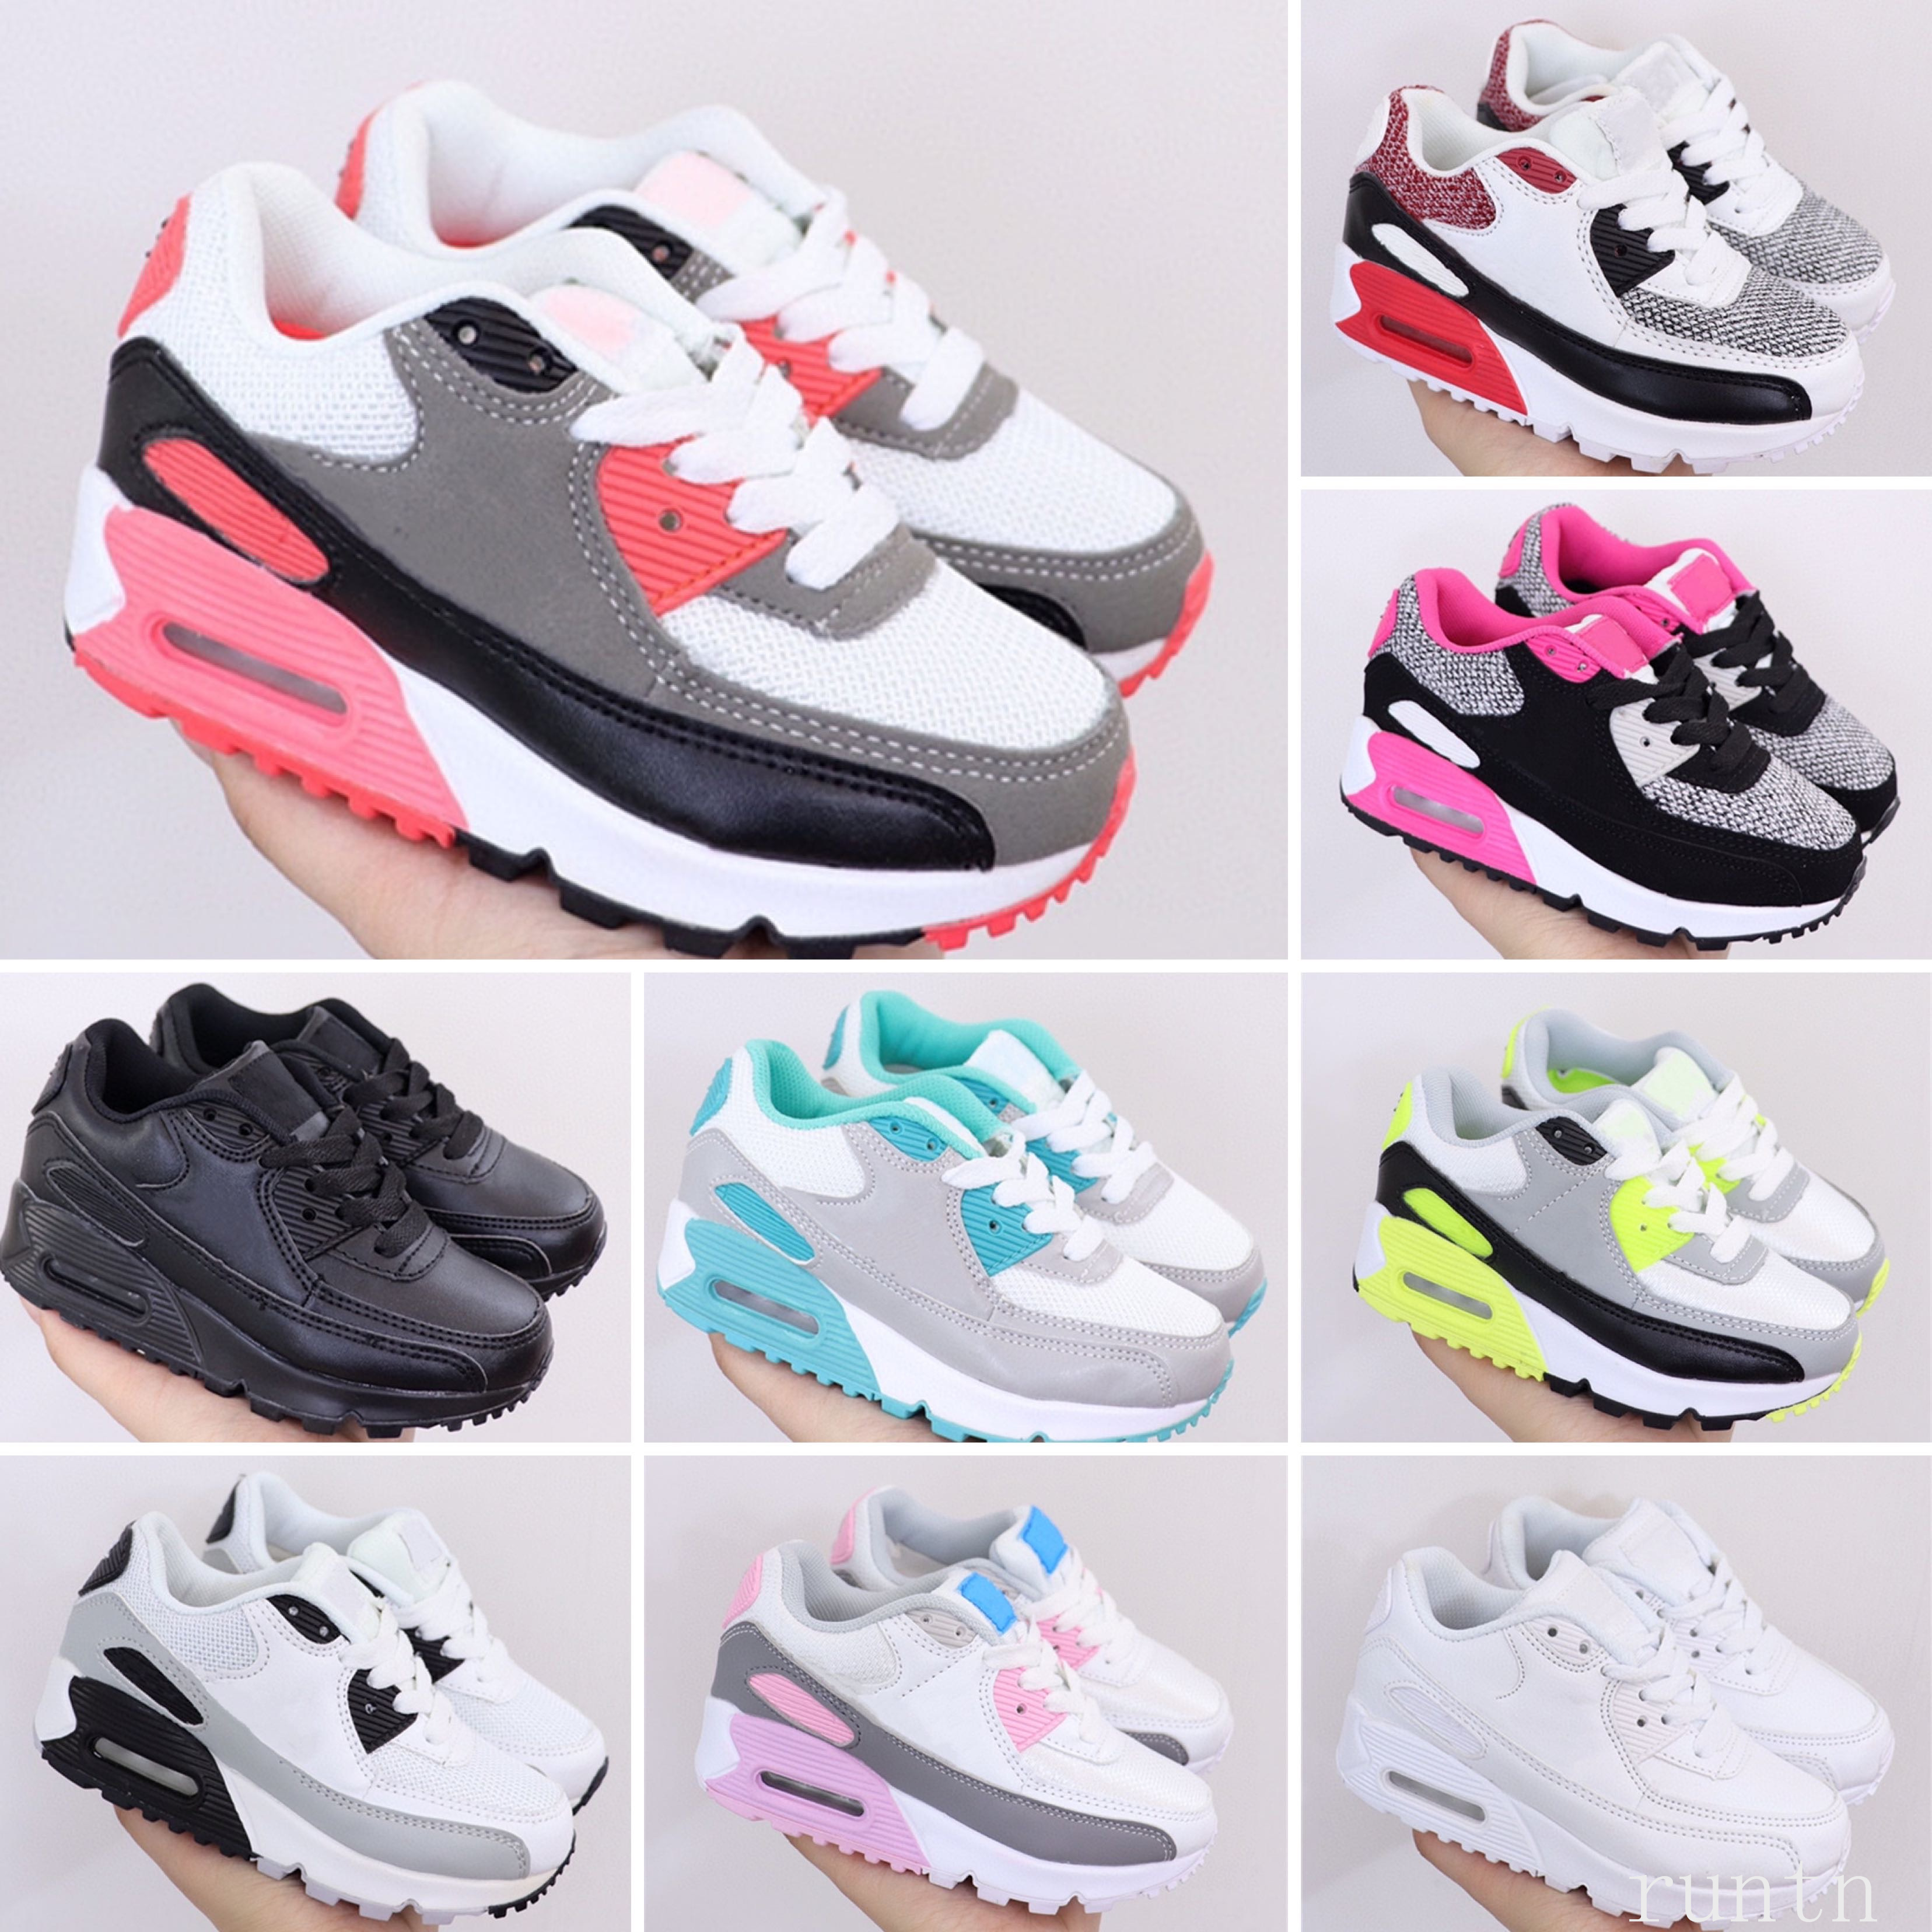 2021 shoes baby II Sports Orthopedic Youth Kids trainers Infant Girls Boys high quality running shoe 16 Colors Size 28-35